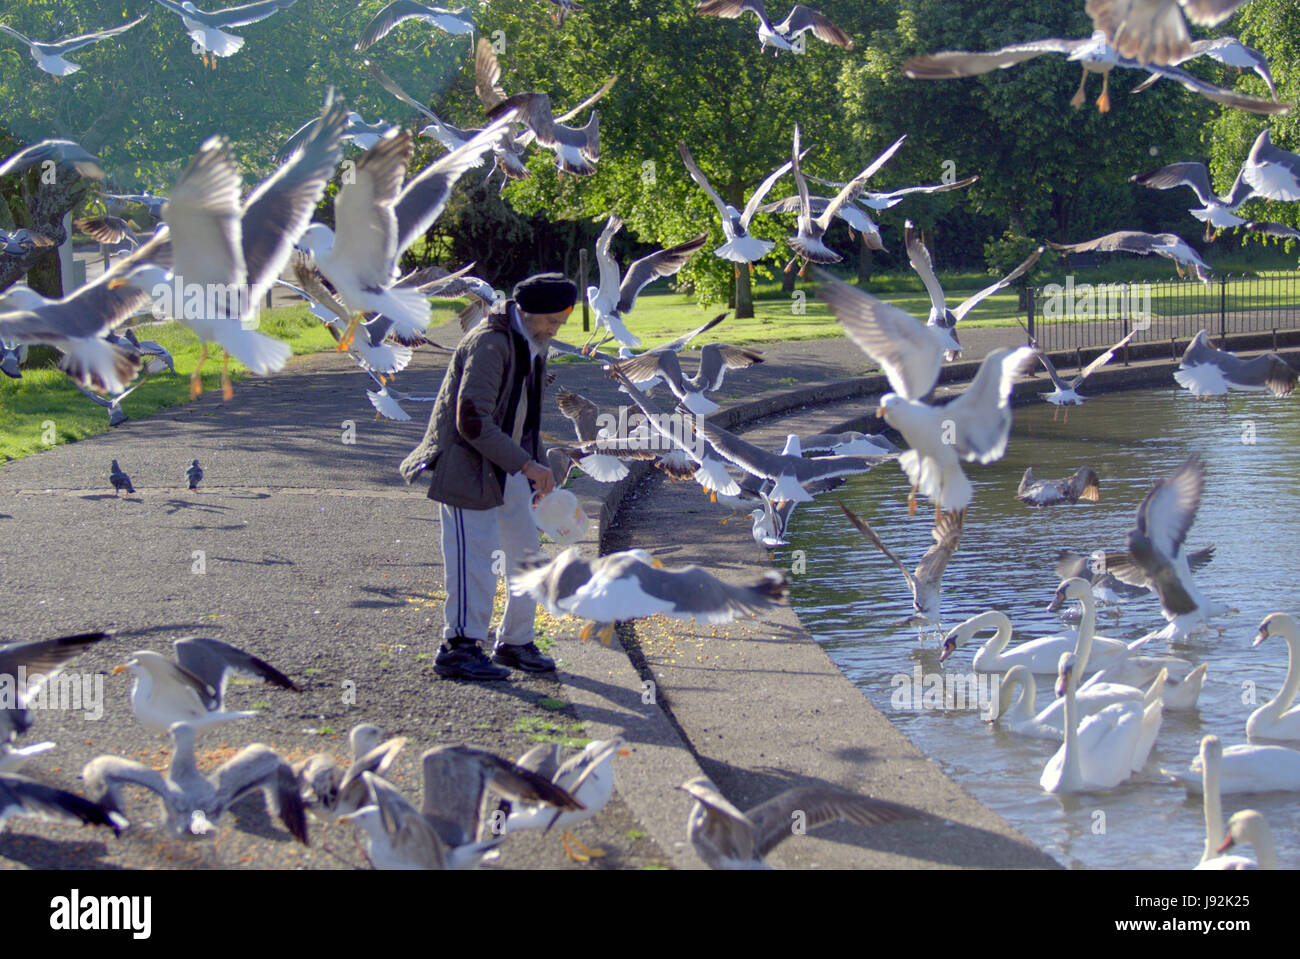 old Sikh h man with turban feeding seagulls feeding in the park with swans in the pond lake Stock Photo